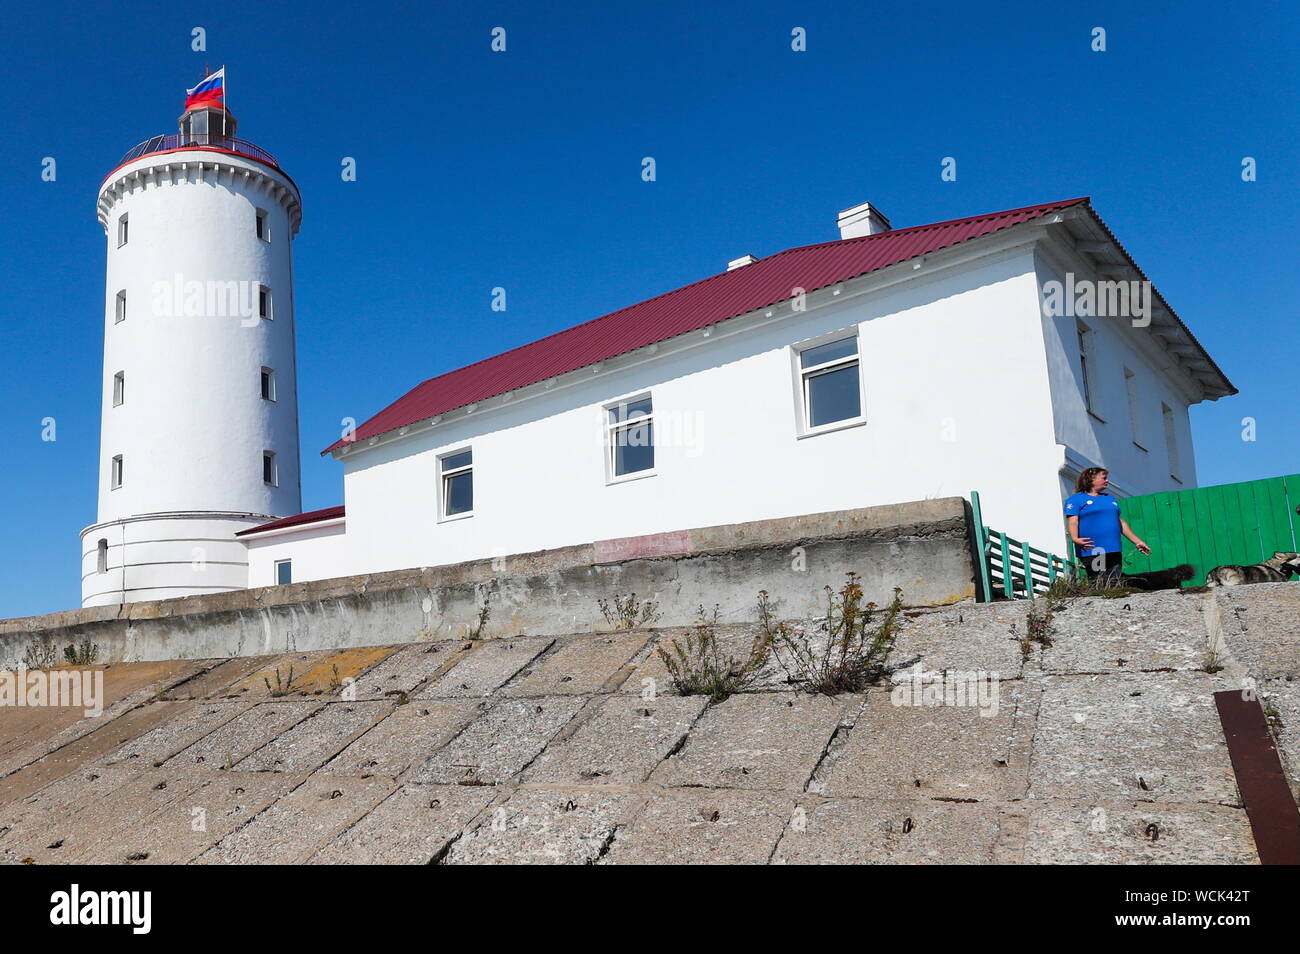 Russia August 28 High Resolution Stock Photography and Images - Alamy